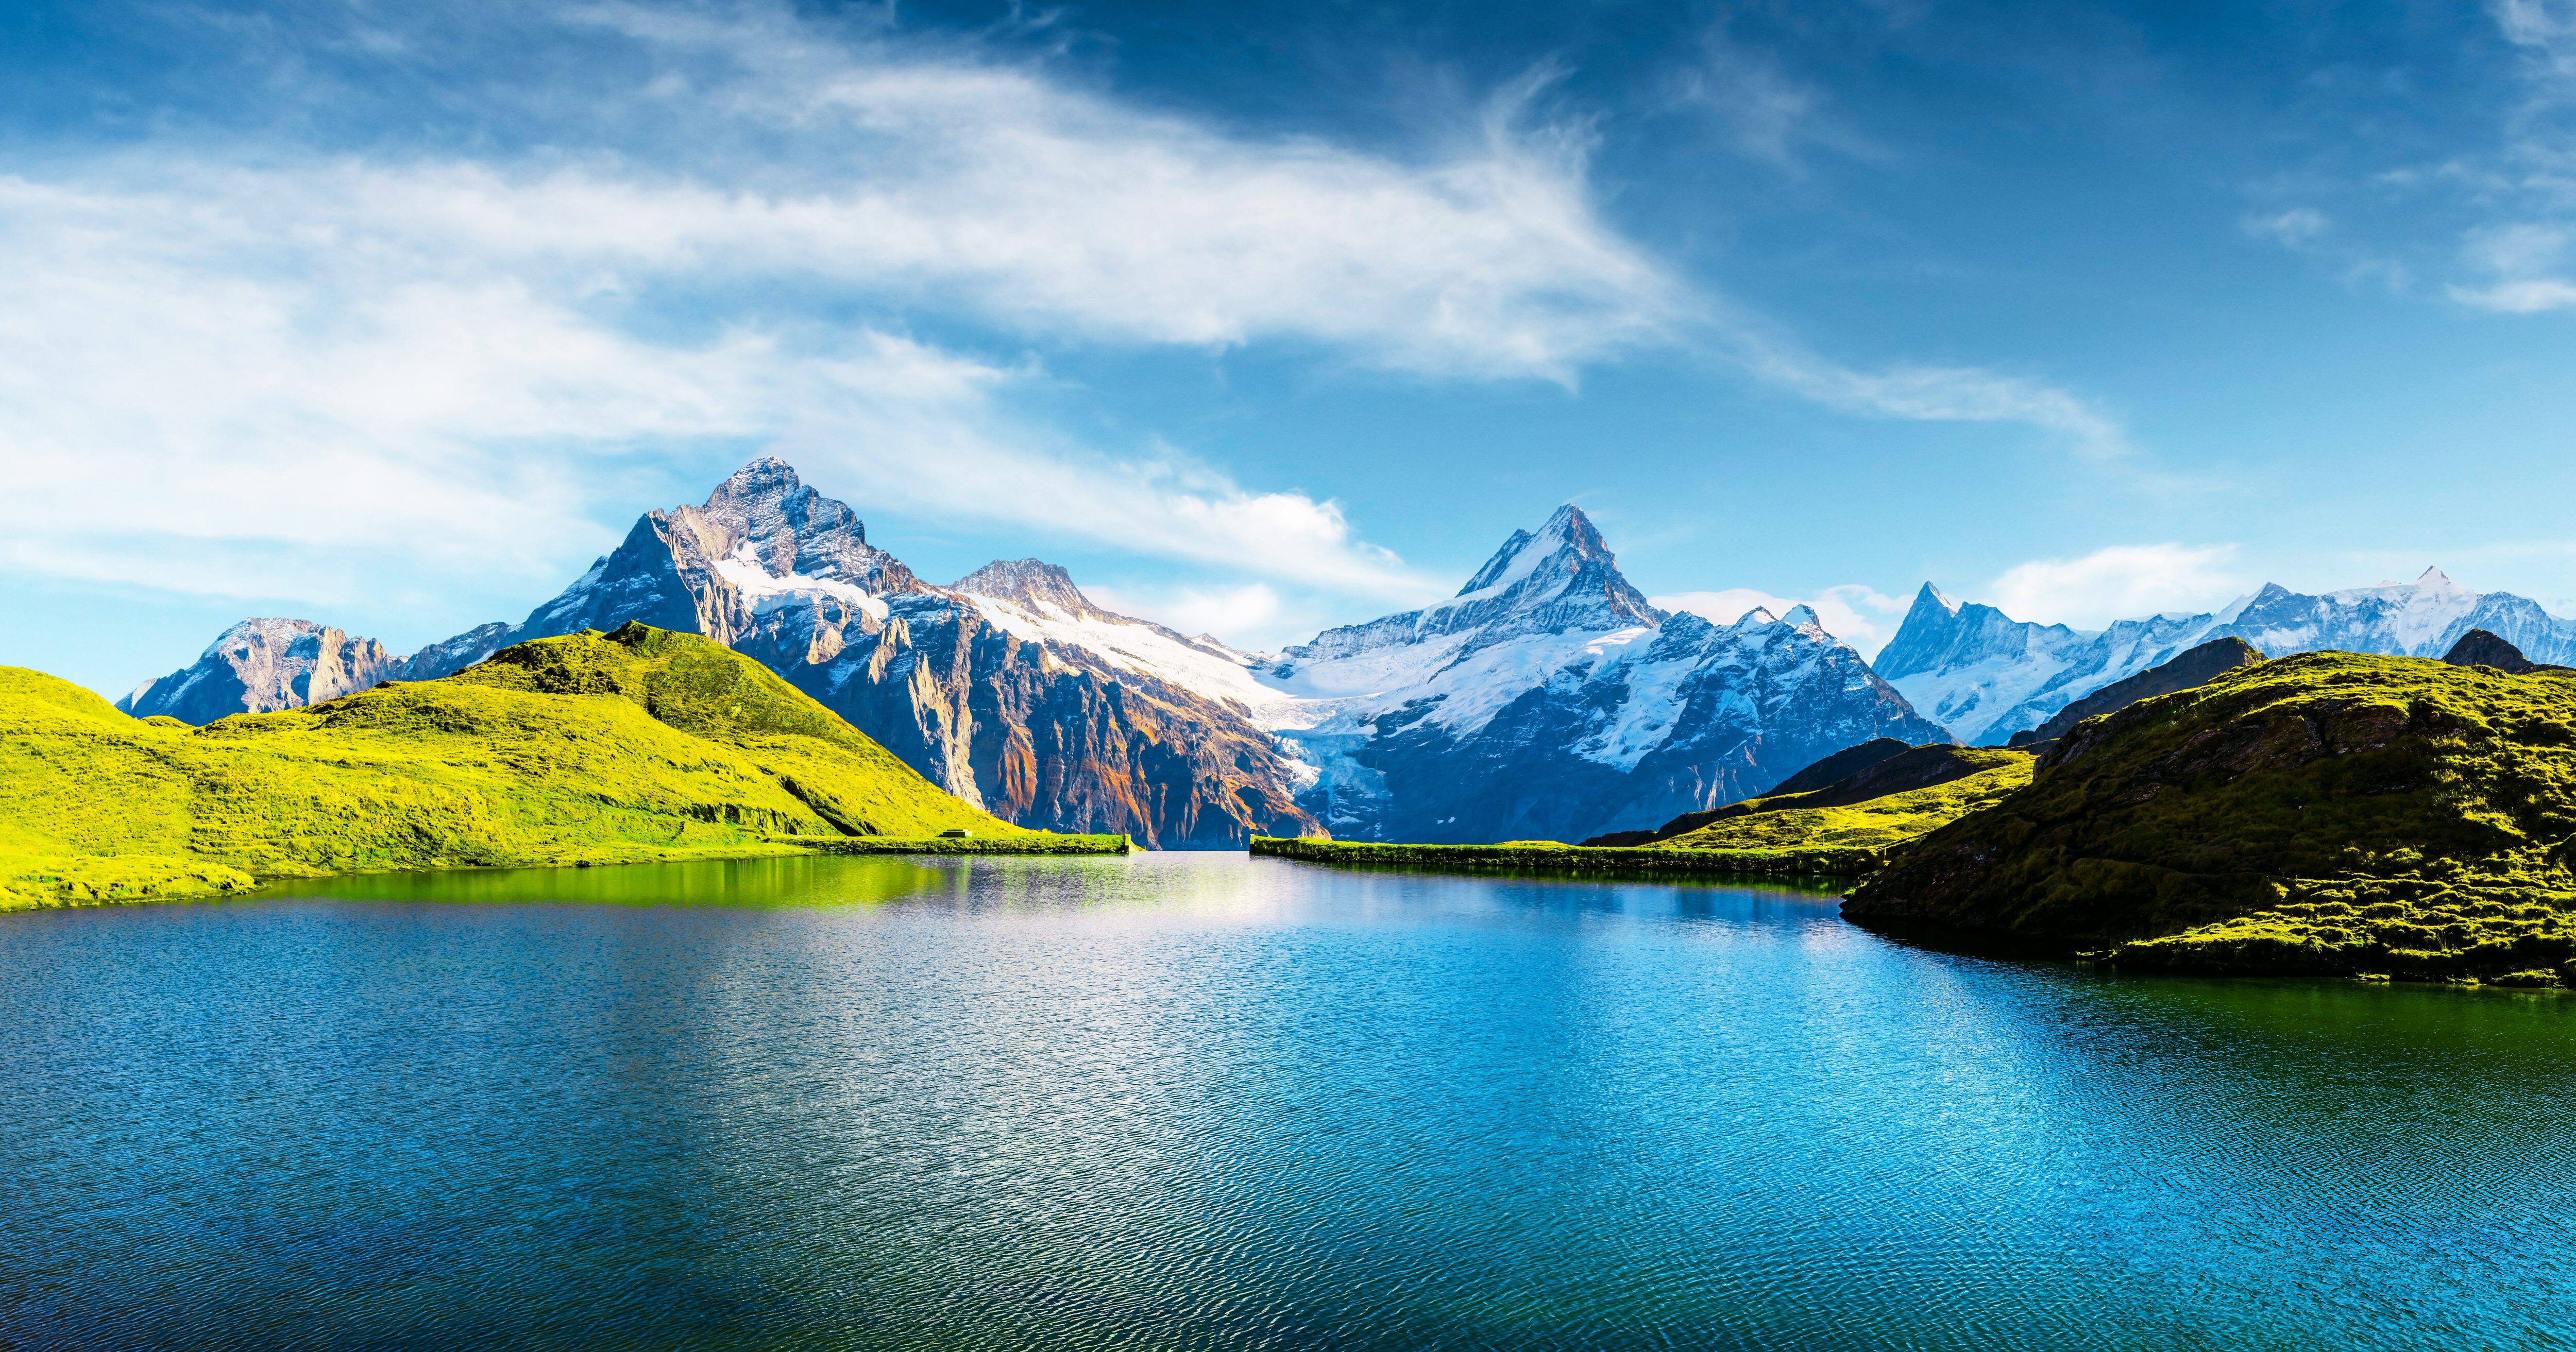 Mountains and lake in Switzerland